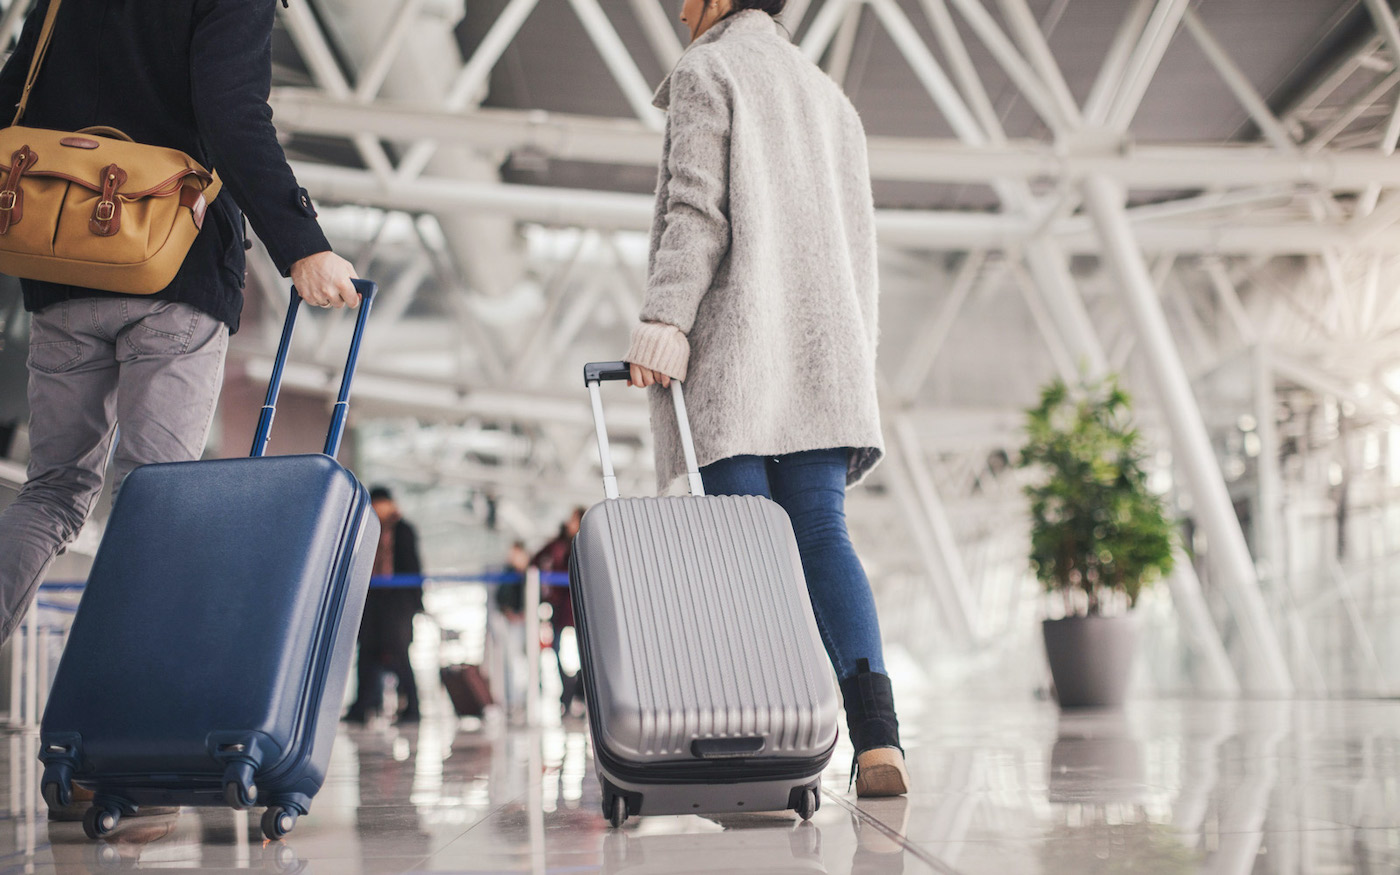 Already looking forward to ending quarantine and travelling the world? We've got you covered. Here is the best carry-on luggage to complete your trip.